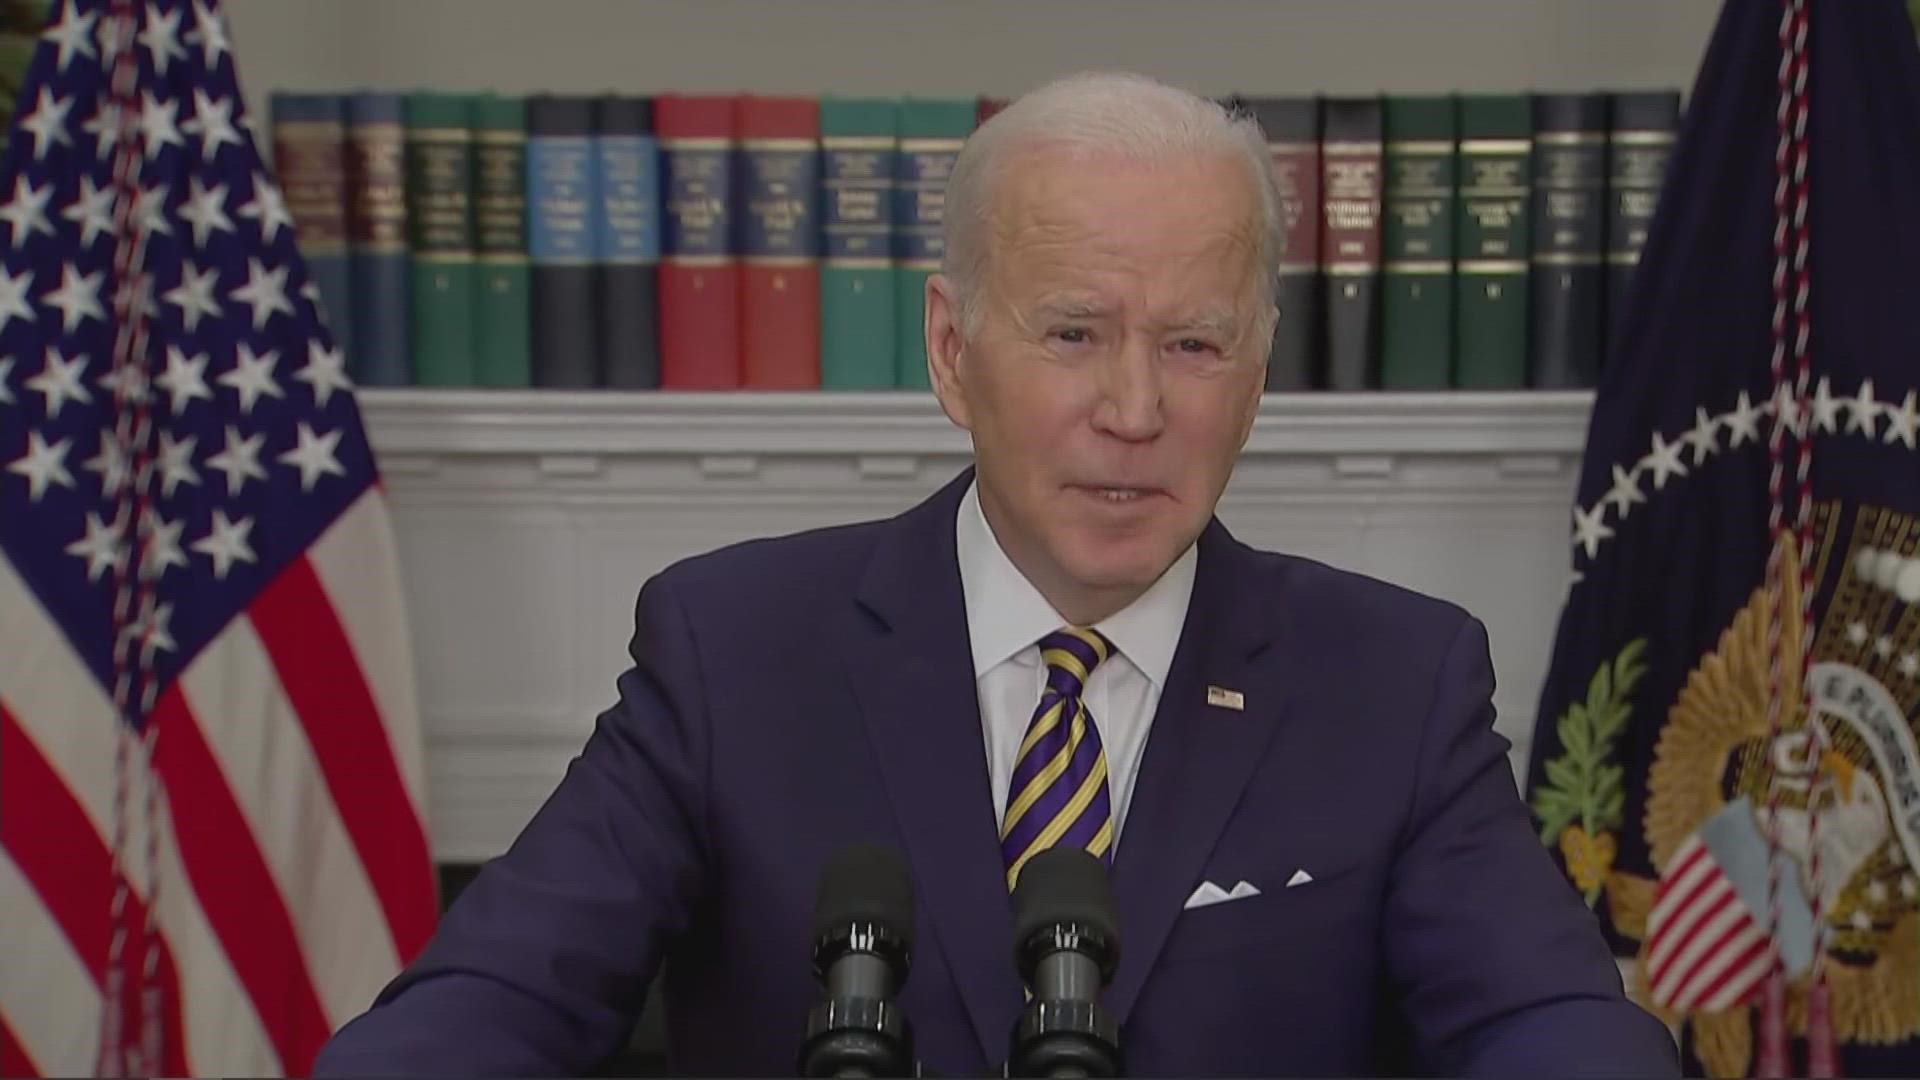 President Joe Biden announced a ban on Russian oil imports in the United States on Tuesday.